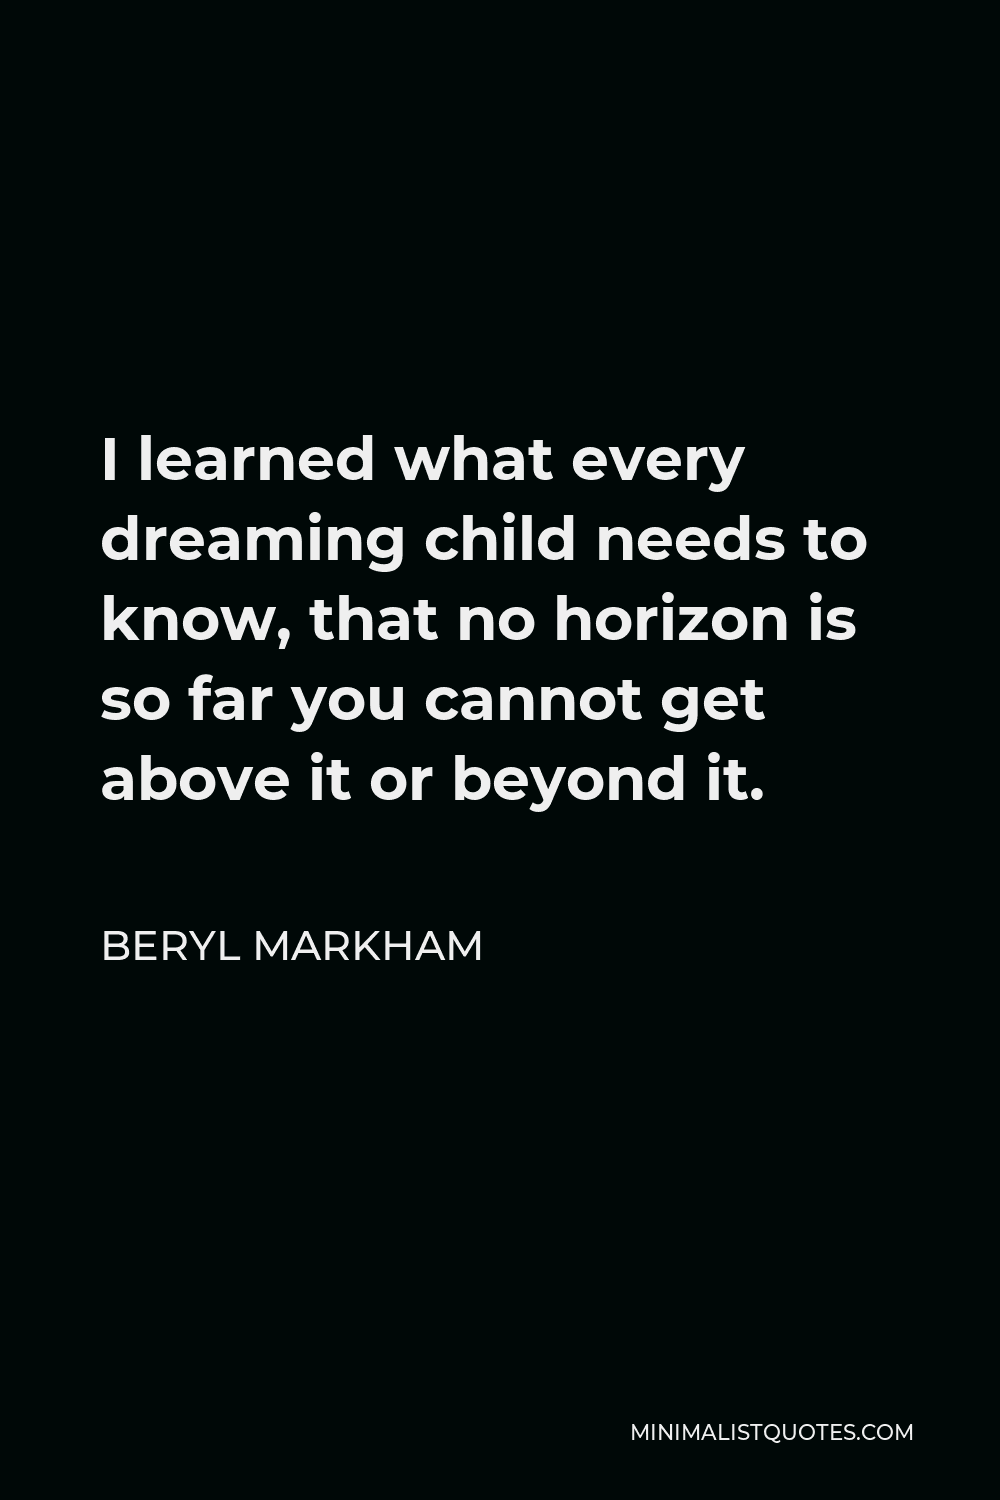 Beryl Markham Quote - I learned what every dreaming child needs to know, that no horizon is so far you cannot get above it or beyond it.